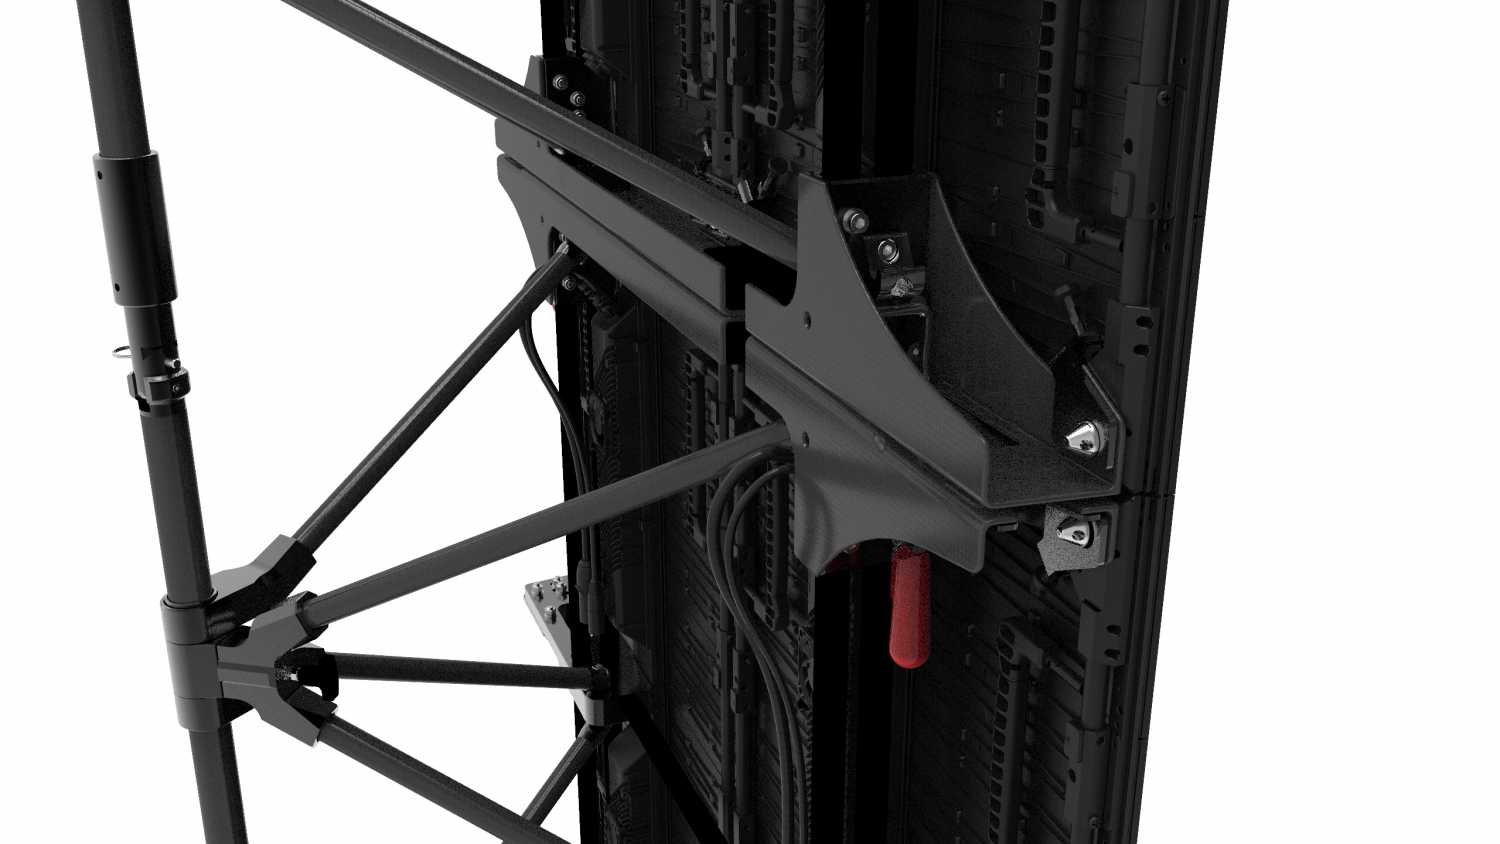 SPACEFRAME is a  touring frame designed to provide operational efficiencies